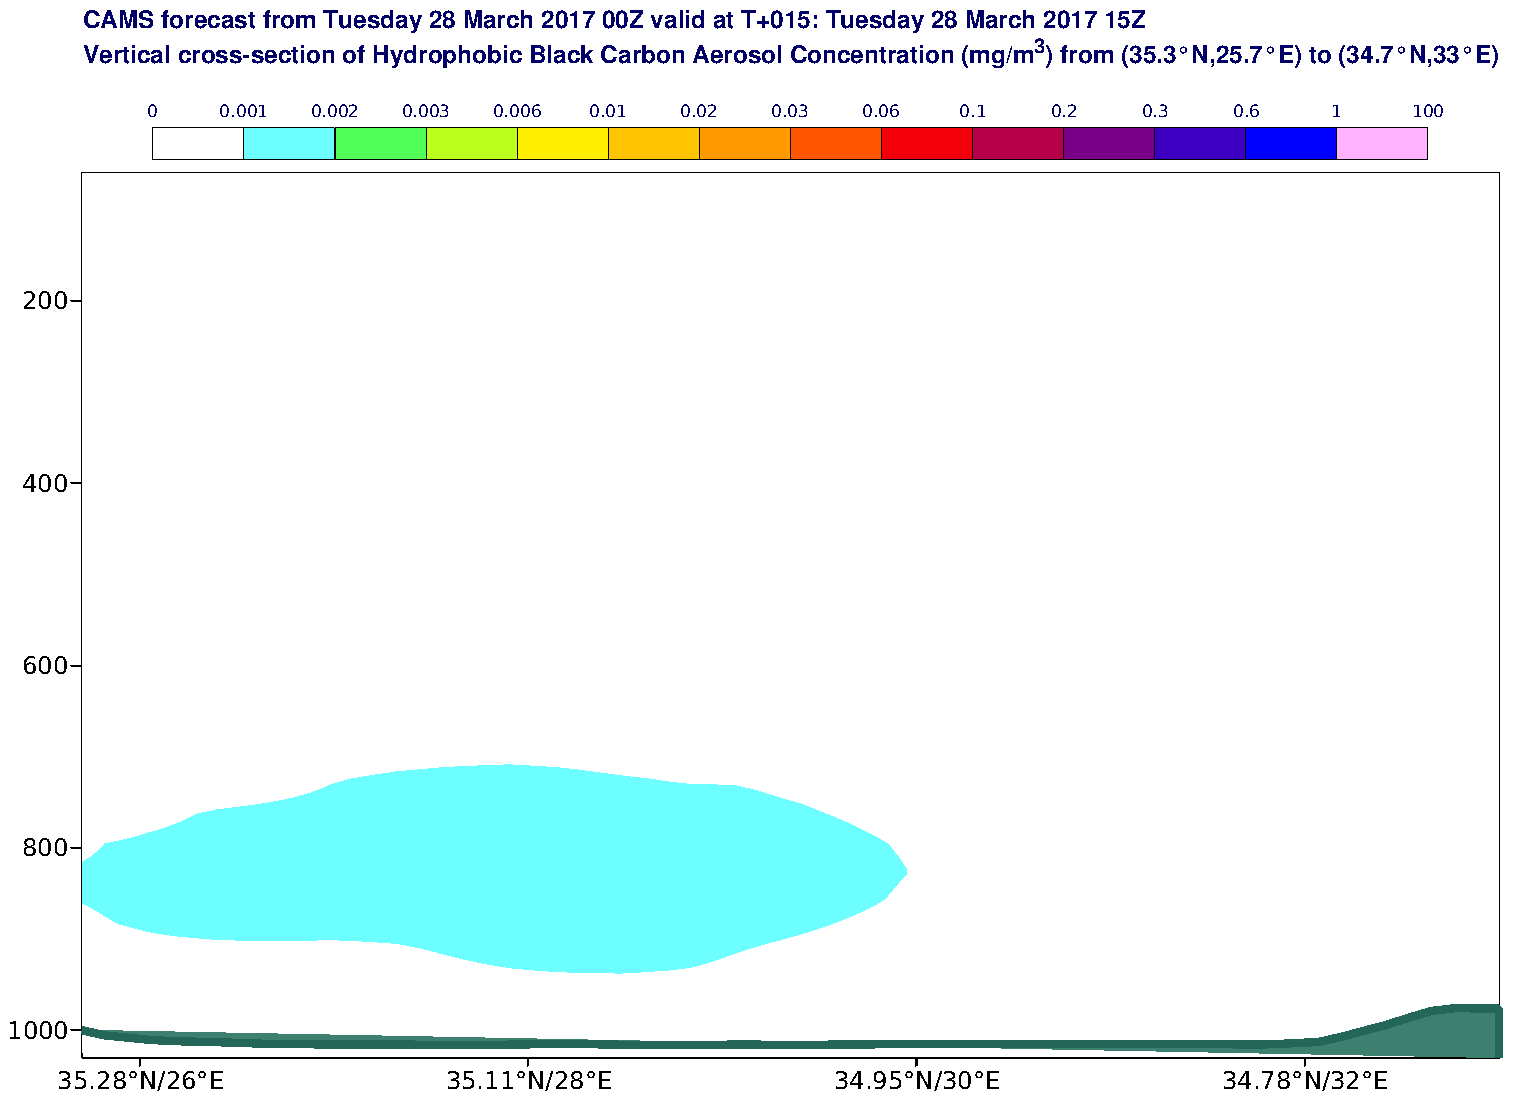 Vertical cross-section of Hydrophobic Black Carbon Aerosol Concentration (mg/m3) valid at T15 - 2017-03-28 15:00